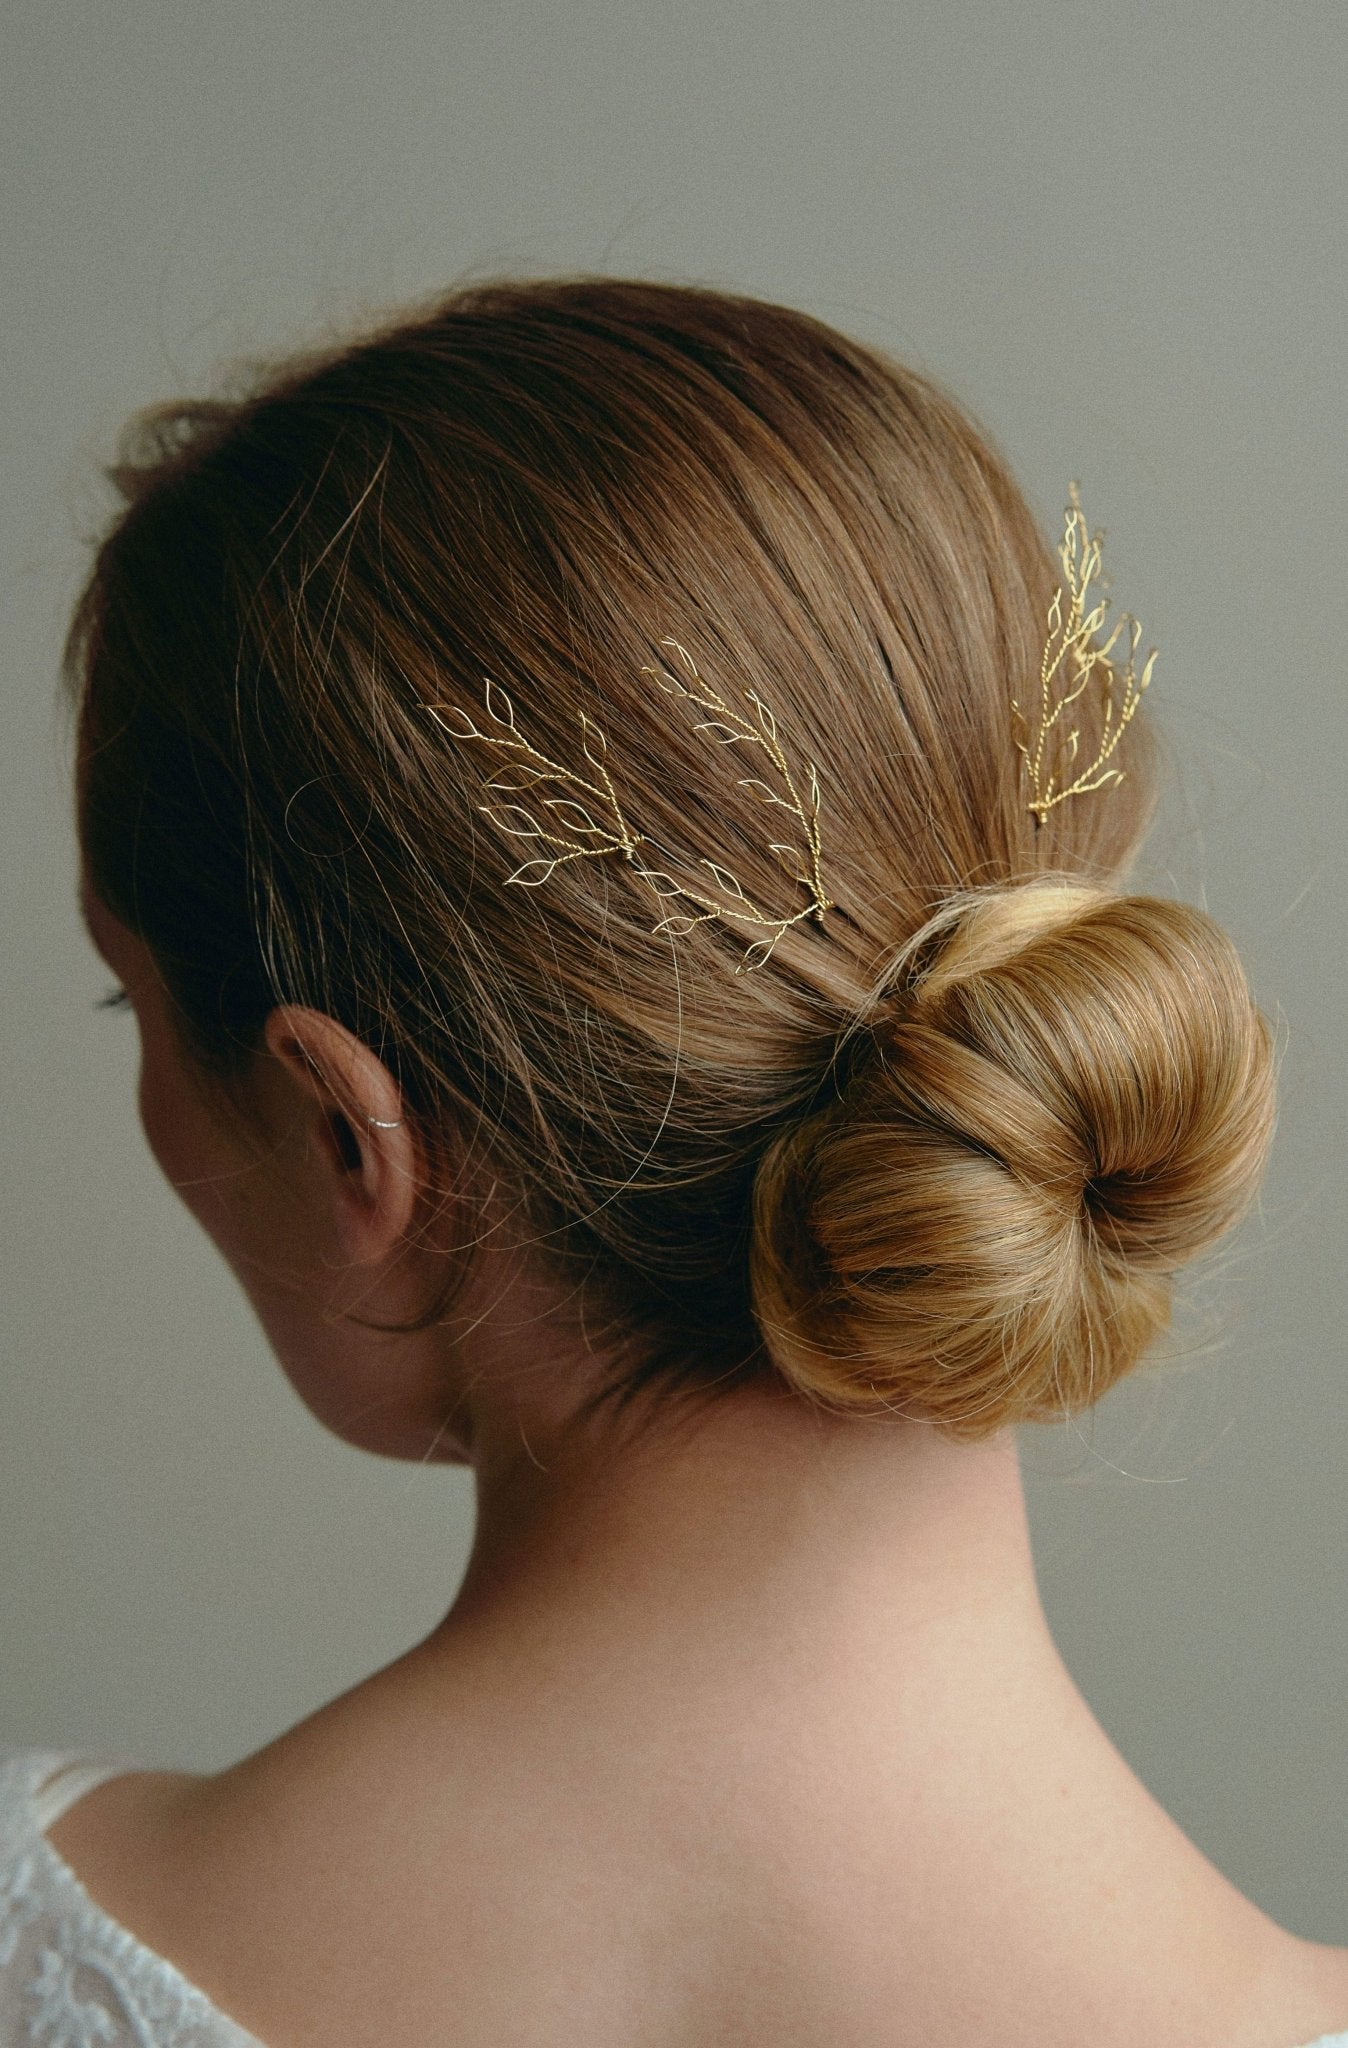 Leafy Wedding Hair Pins - Gold Hairpins worn by model with low bun updo